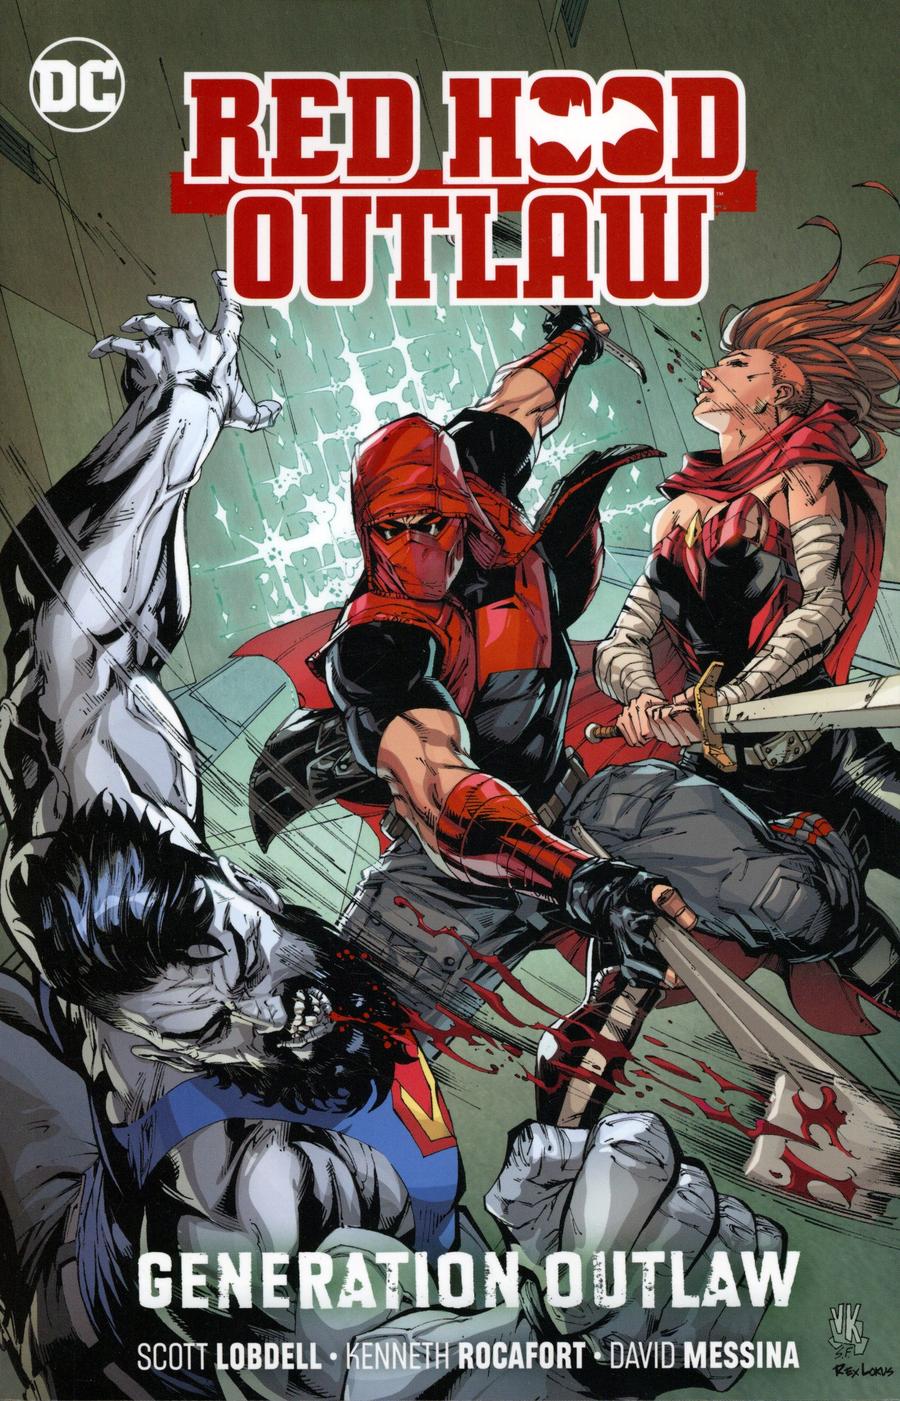 Red Hood Outlaw Vol 3 Generation Outlaw TP